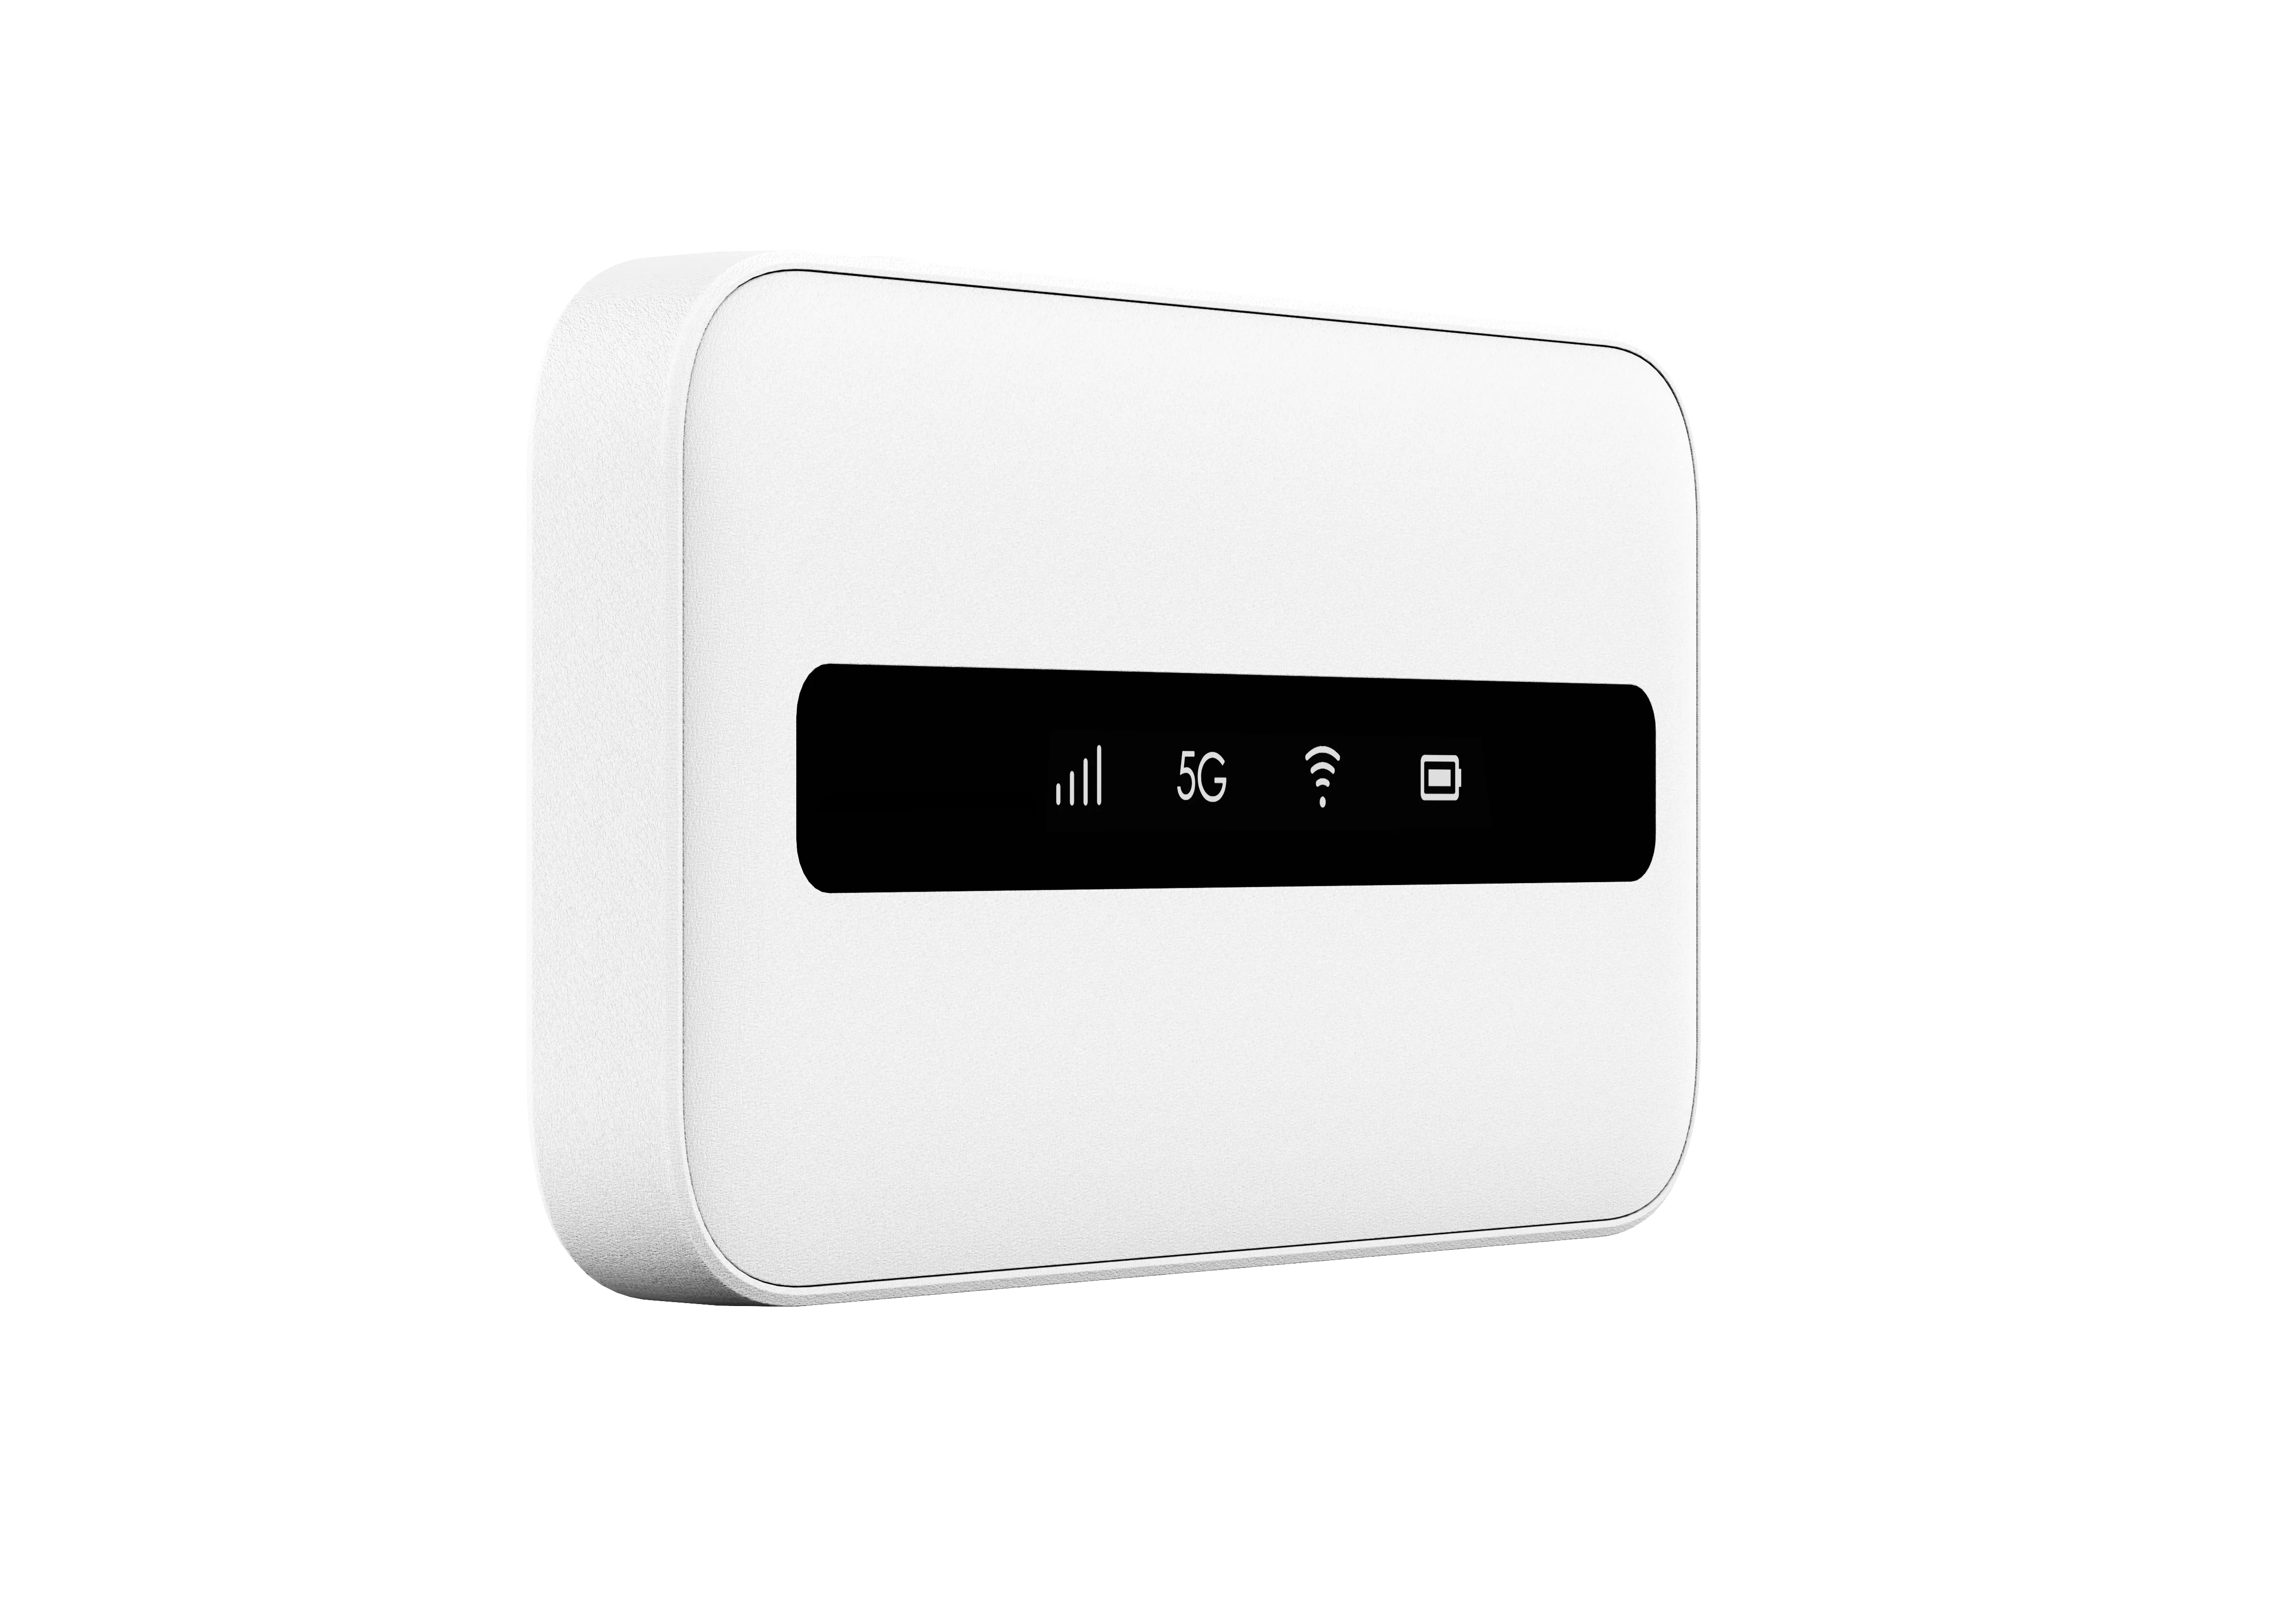 HUASIFEI 5G mobile Mini wi-fi router 3600mah 5g cpe portable modem 1800mbps high speed 4G wifi router wireless with sim card